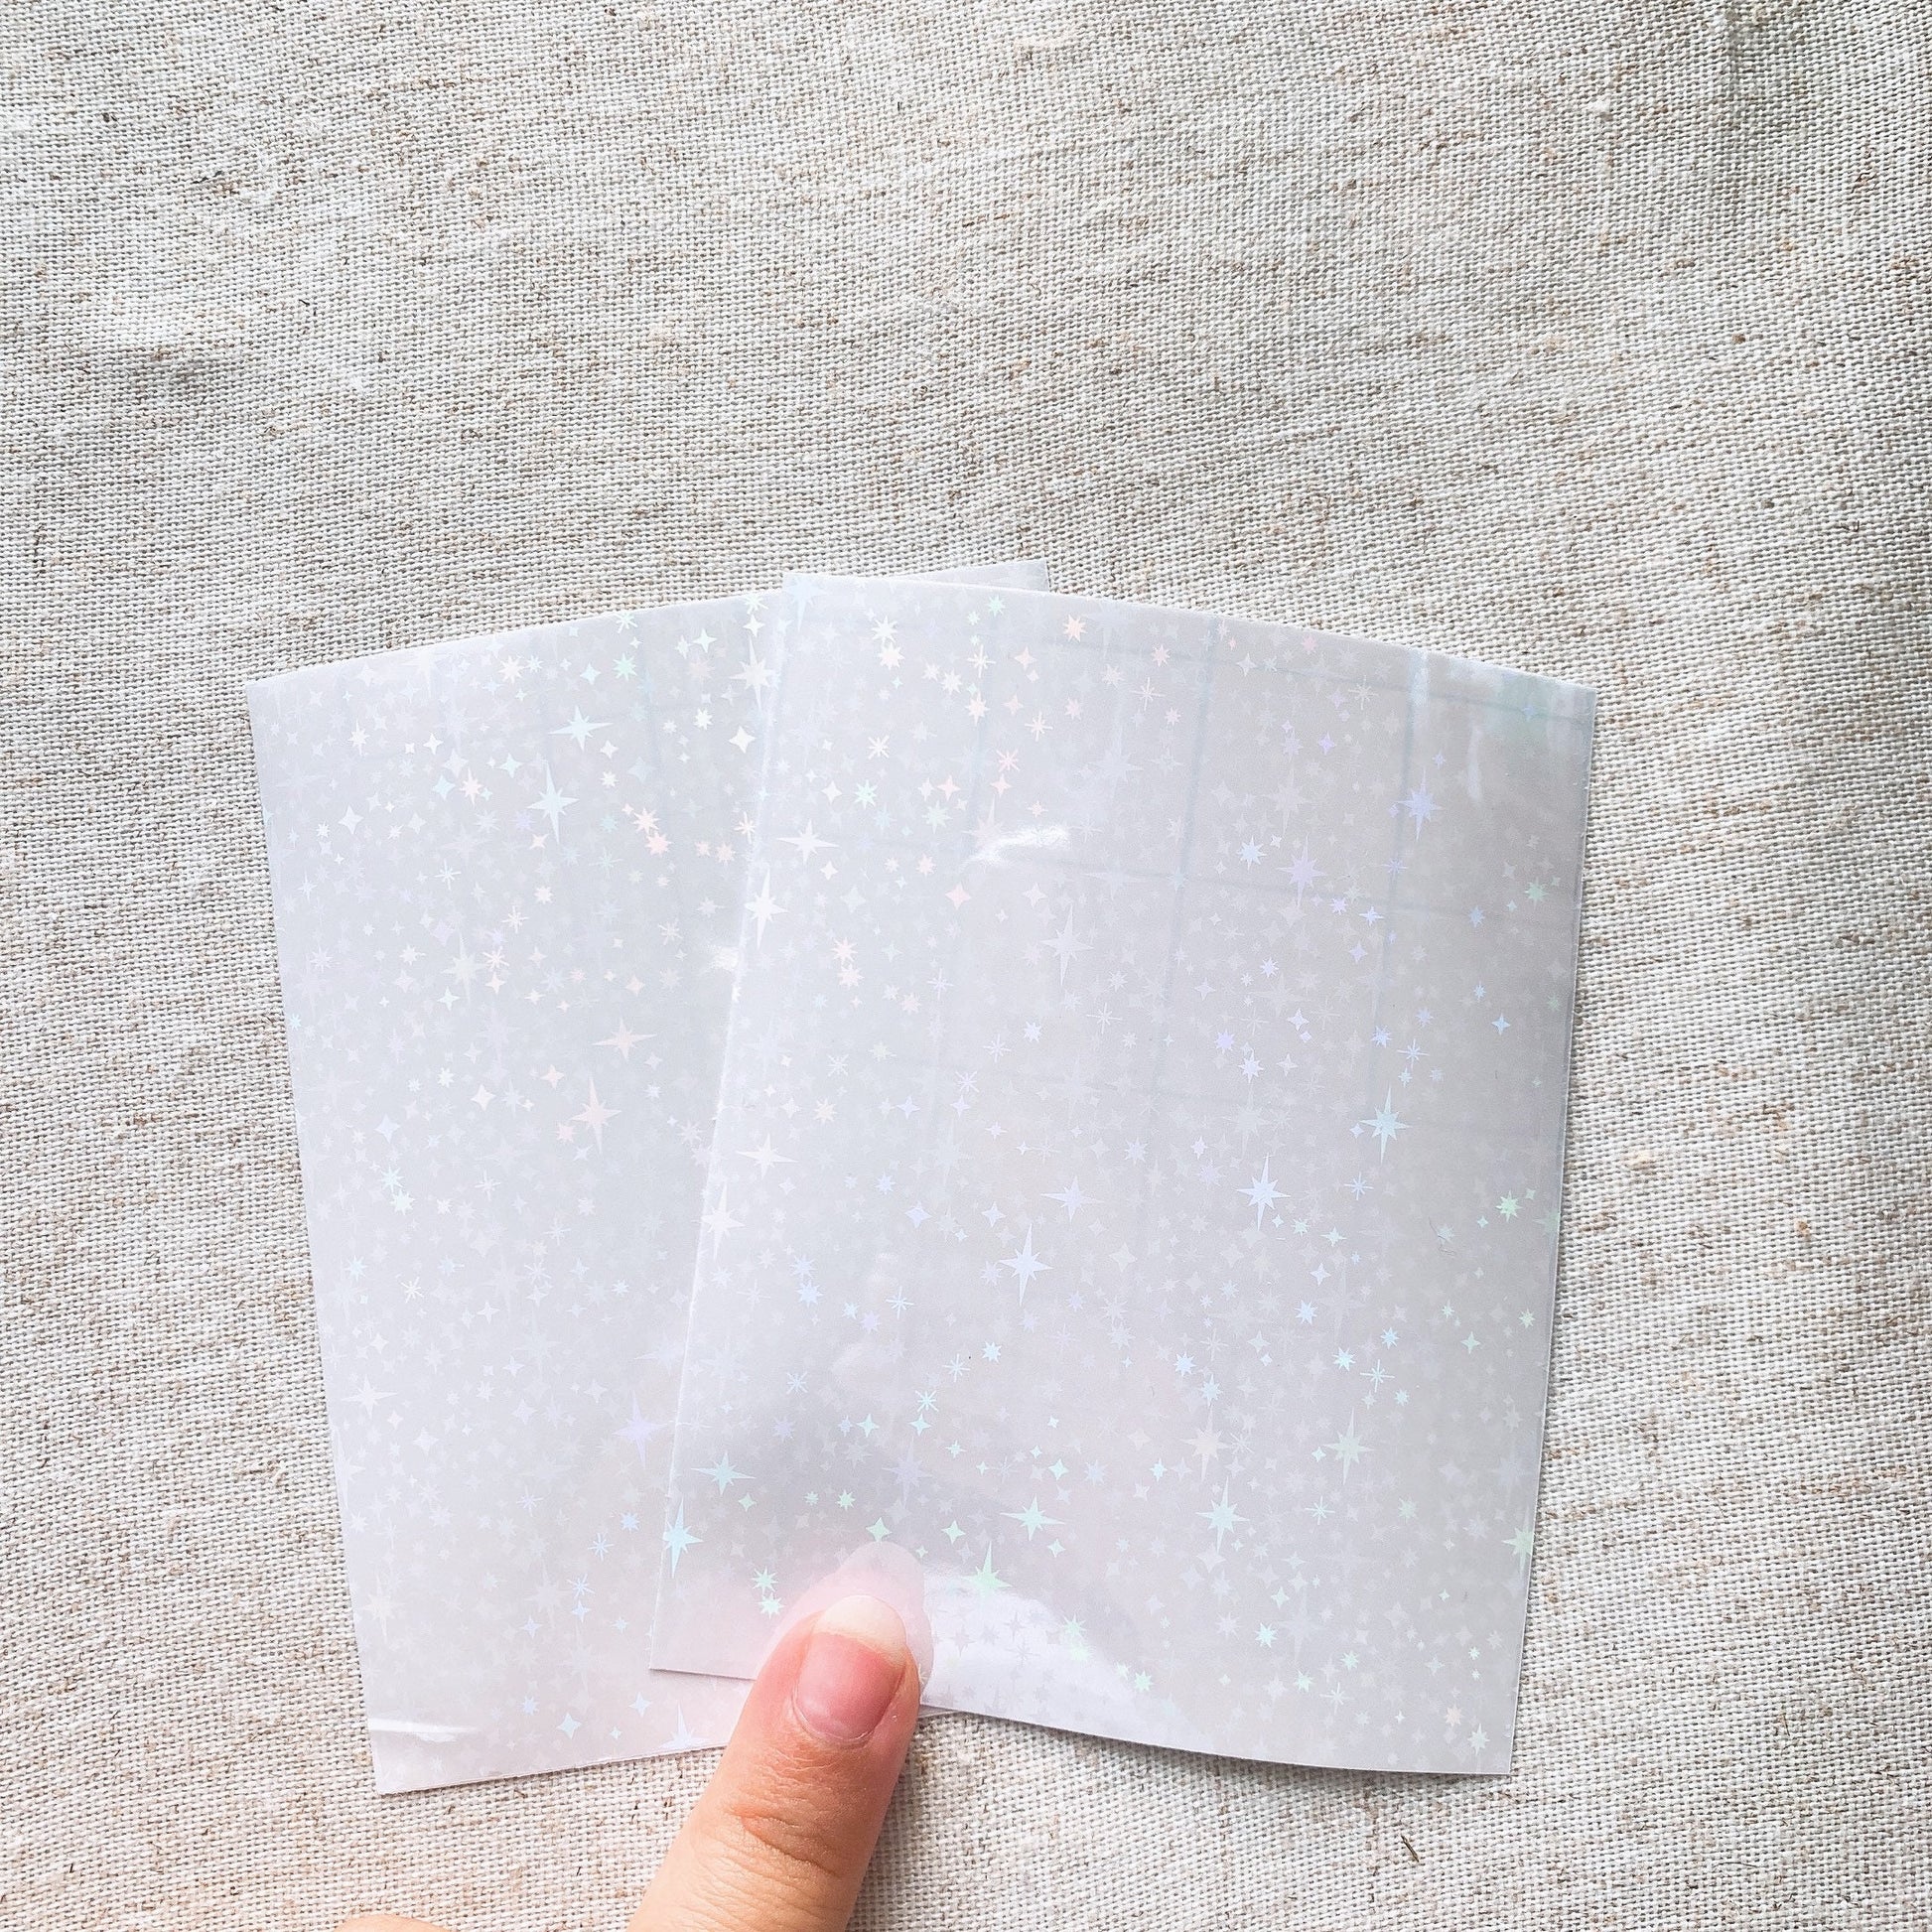 Holo Laminate Overlay | Toploader, Journaling, Polco, Deco | Holographic Heart, Twinkle, Rainbow | Kpop Photocard Toploader